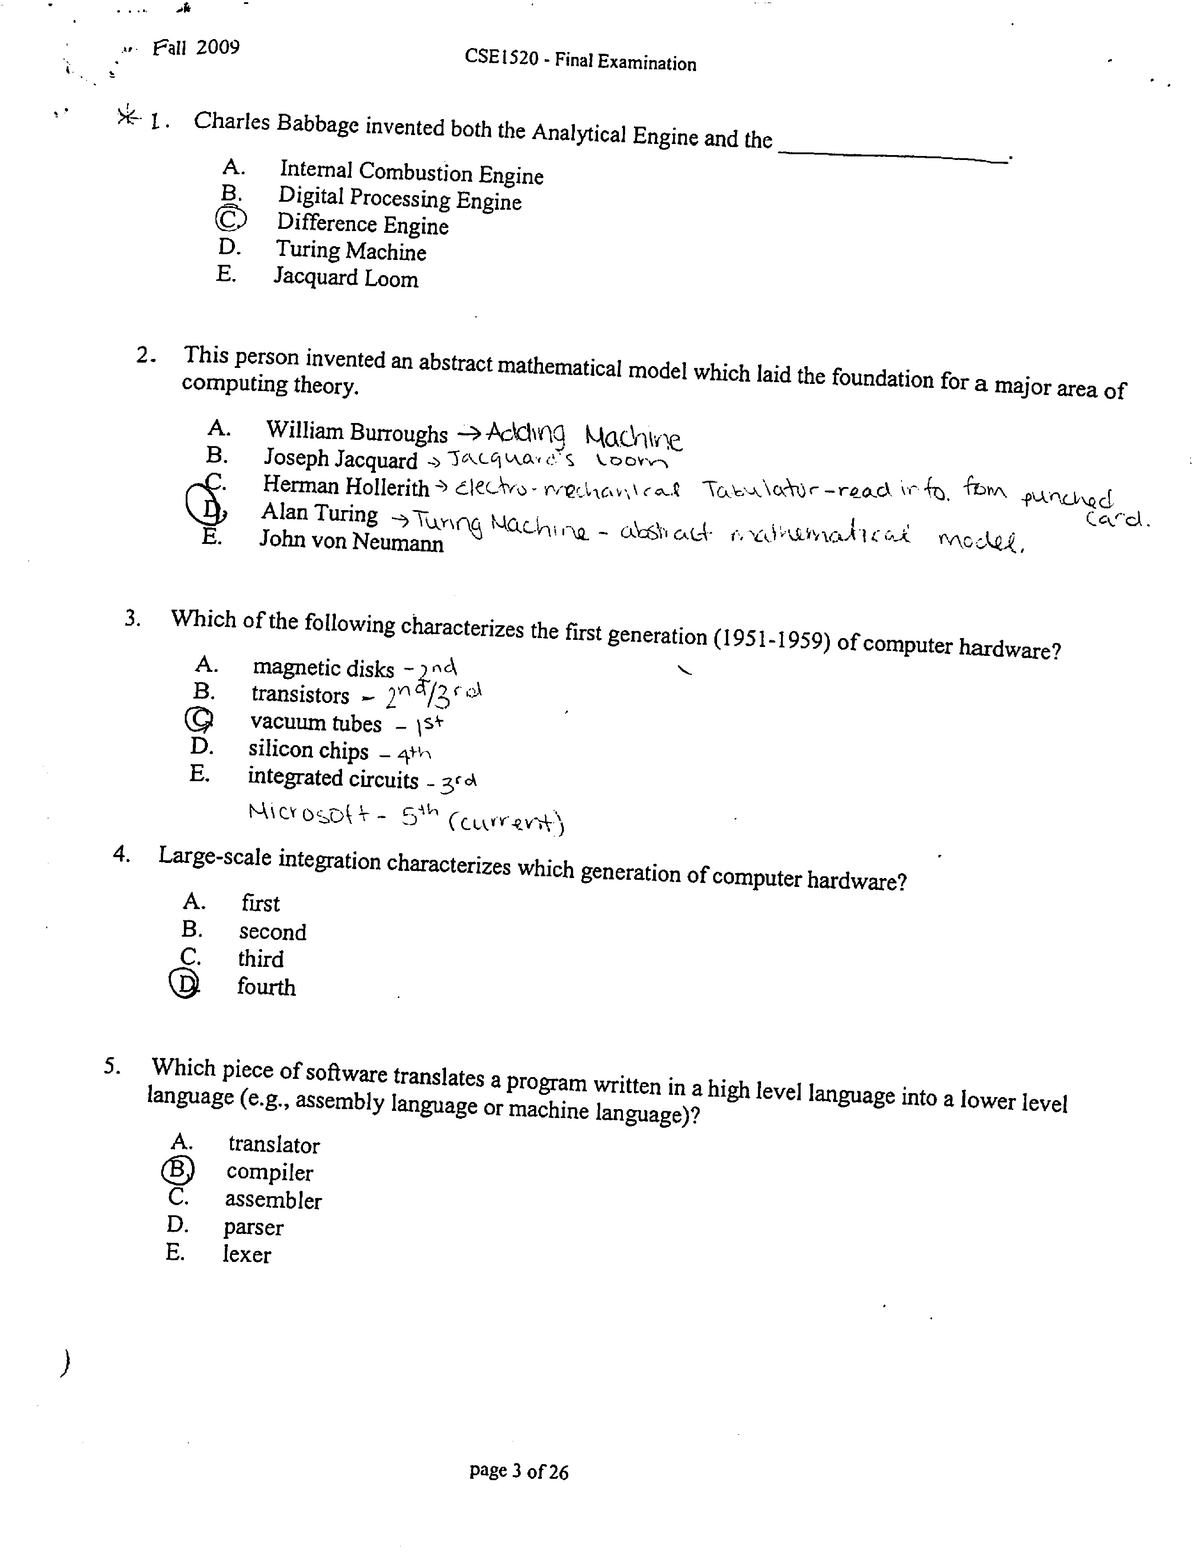 educational research exam questions